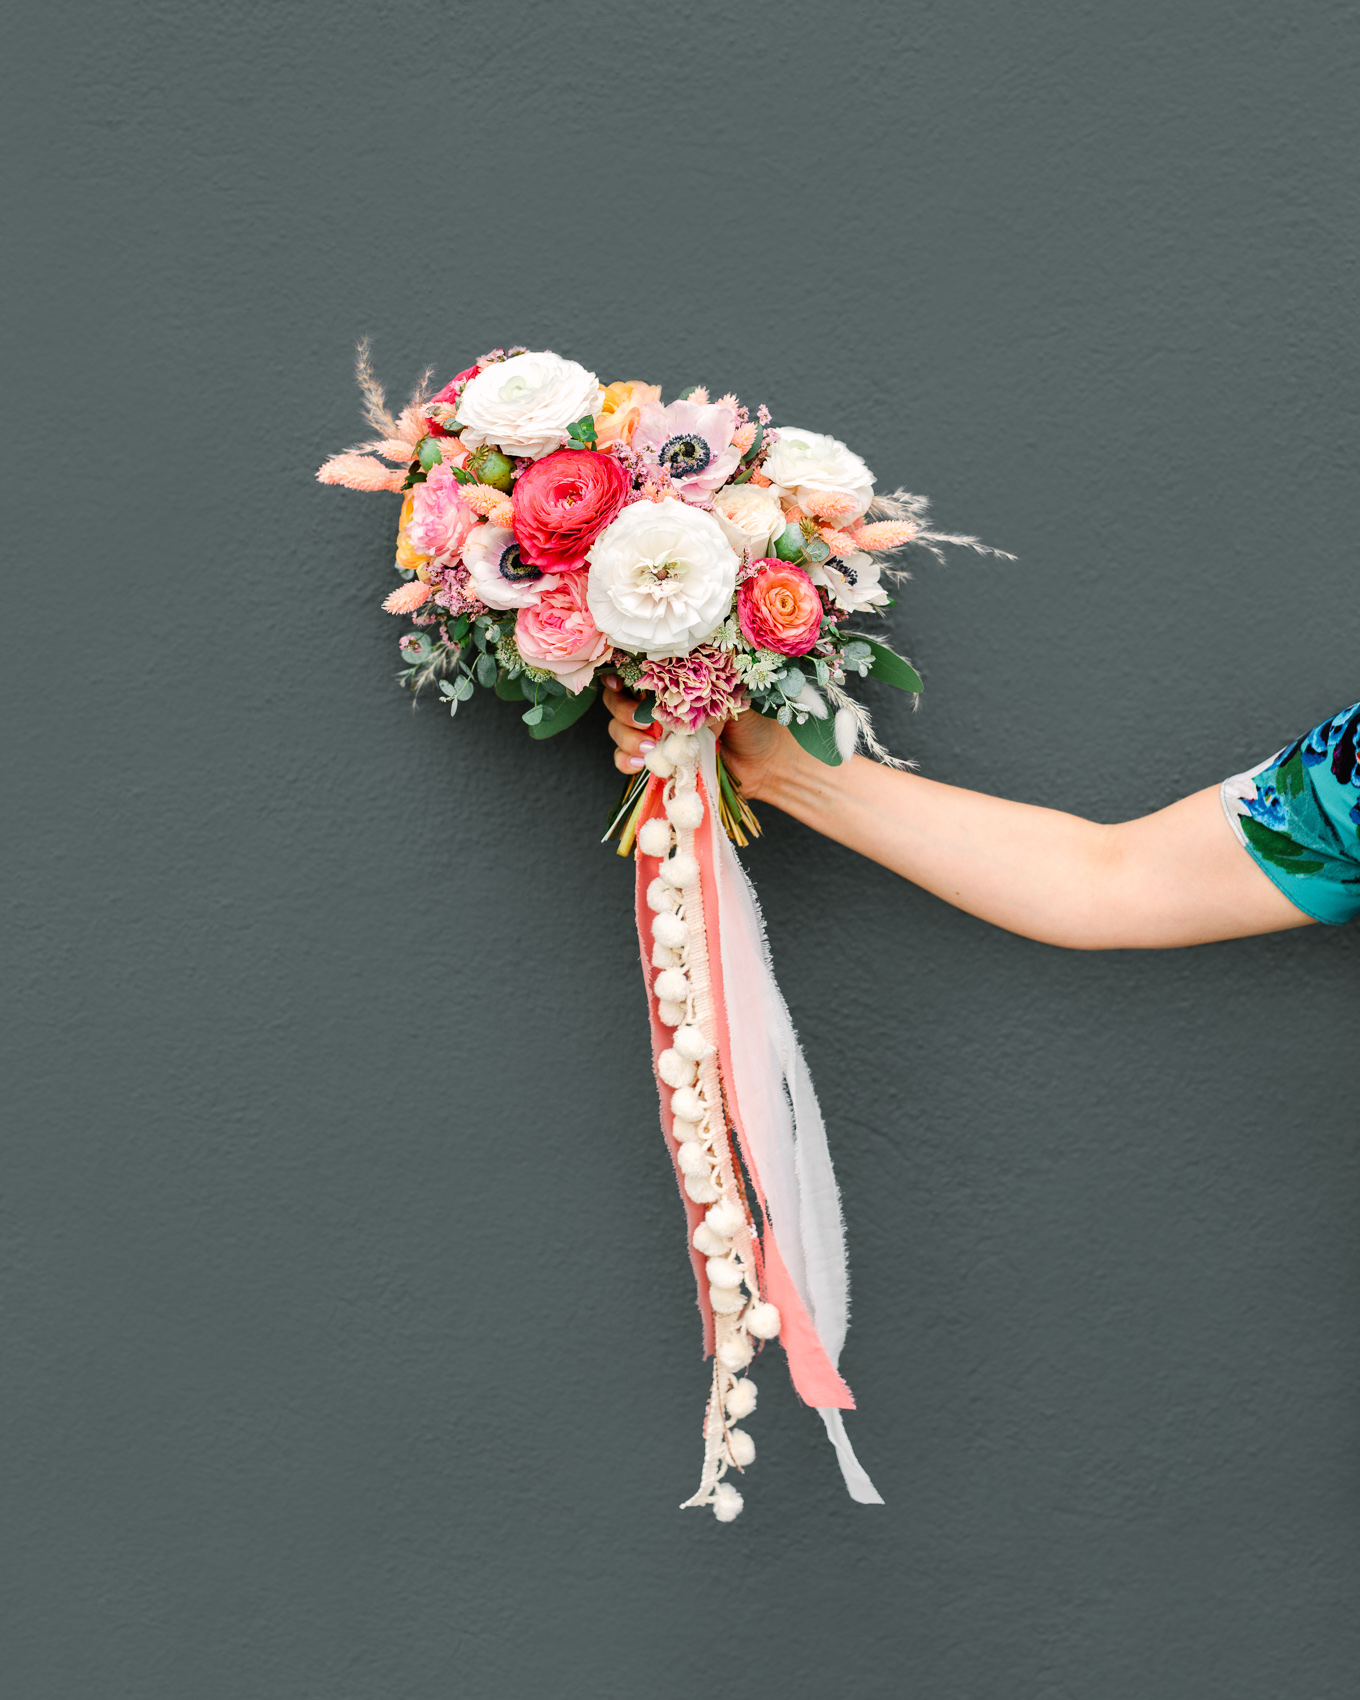 Spring flower bouquet with pom pom ribbons | Beautiful bridal bouquet inspiration and advice | Colorful and elevated wedding photography for fun-loving couples in Southern California | #weddingflowers #weddingbouquet #bridebouquet #bouquetideas #uniquebouquet   Source: Mary Costa Photography | Los Angeles